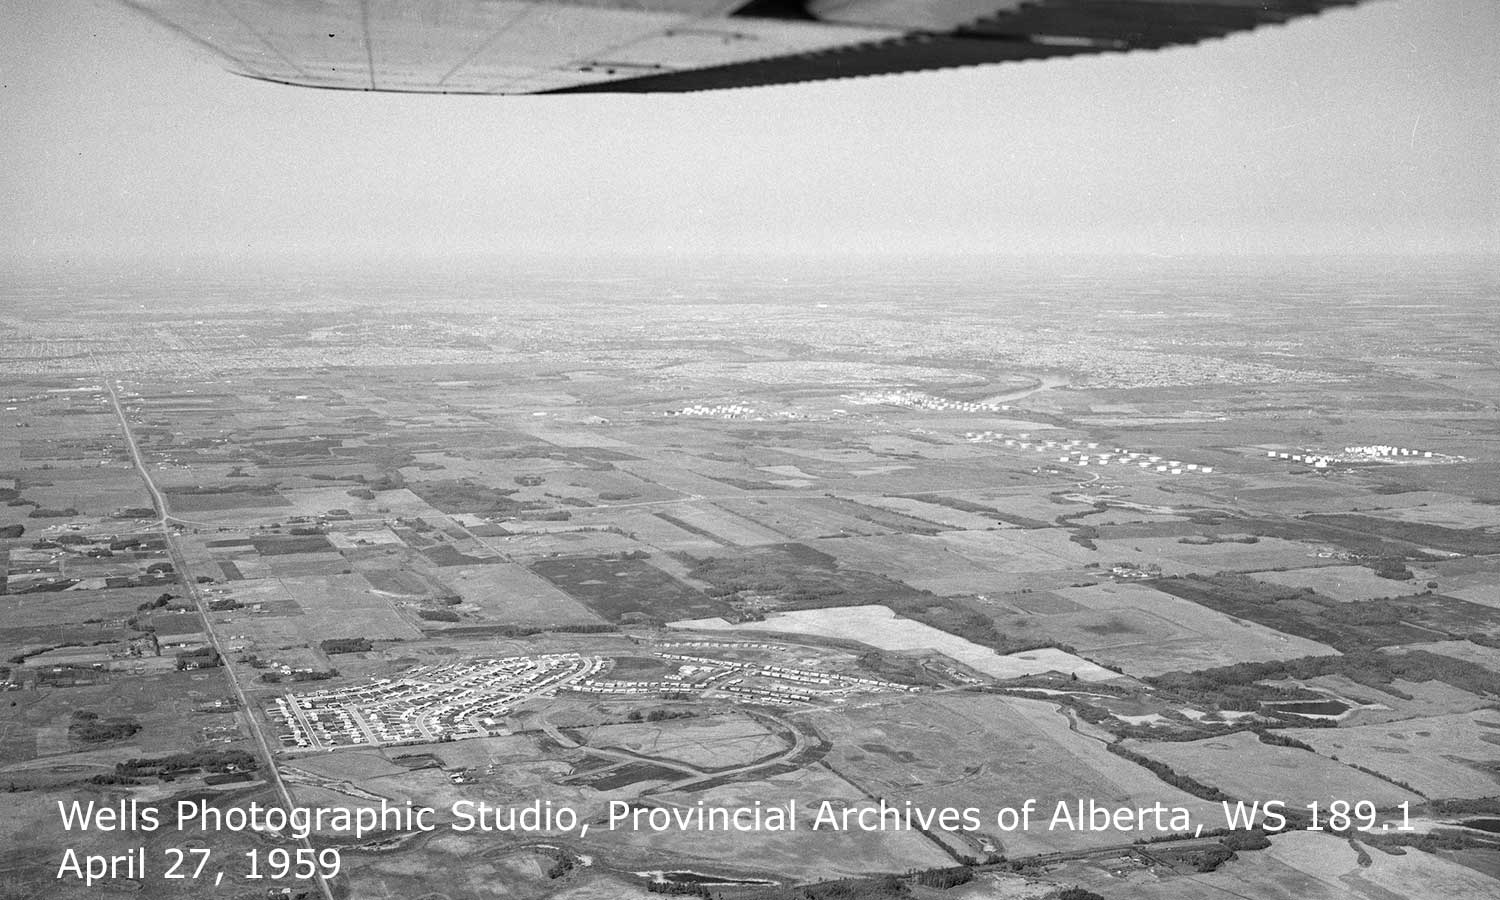 Sherwood Park surrounded by farms